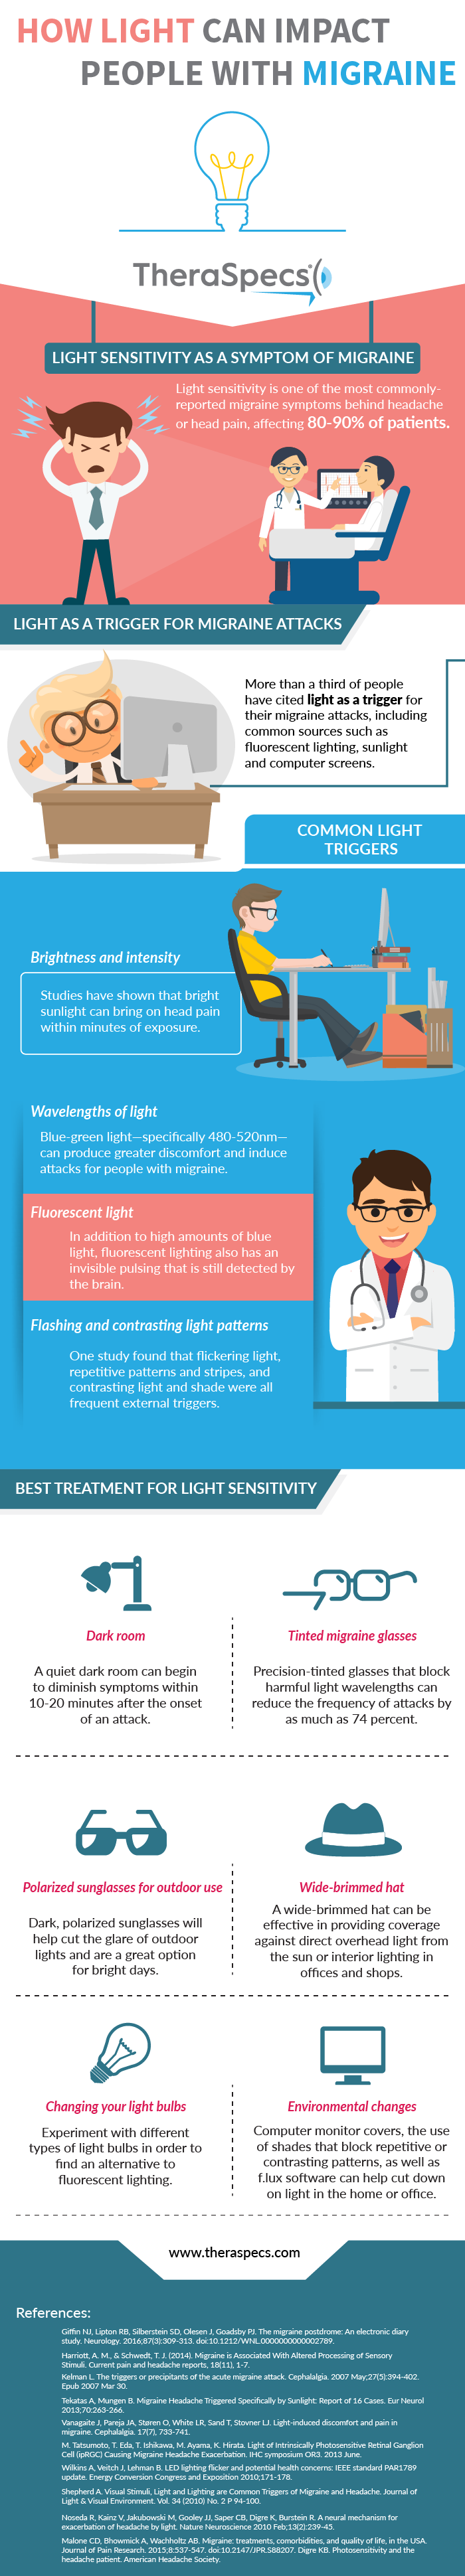 How Light Impacts People with Migraine Infographic